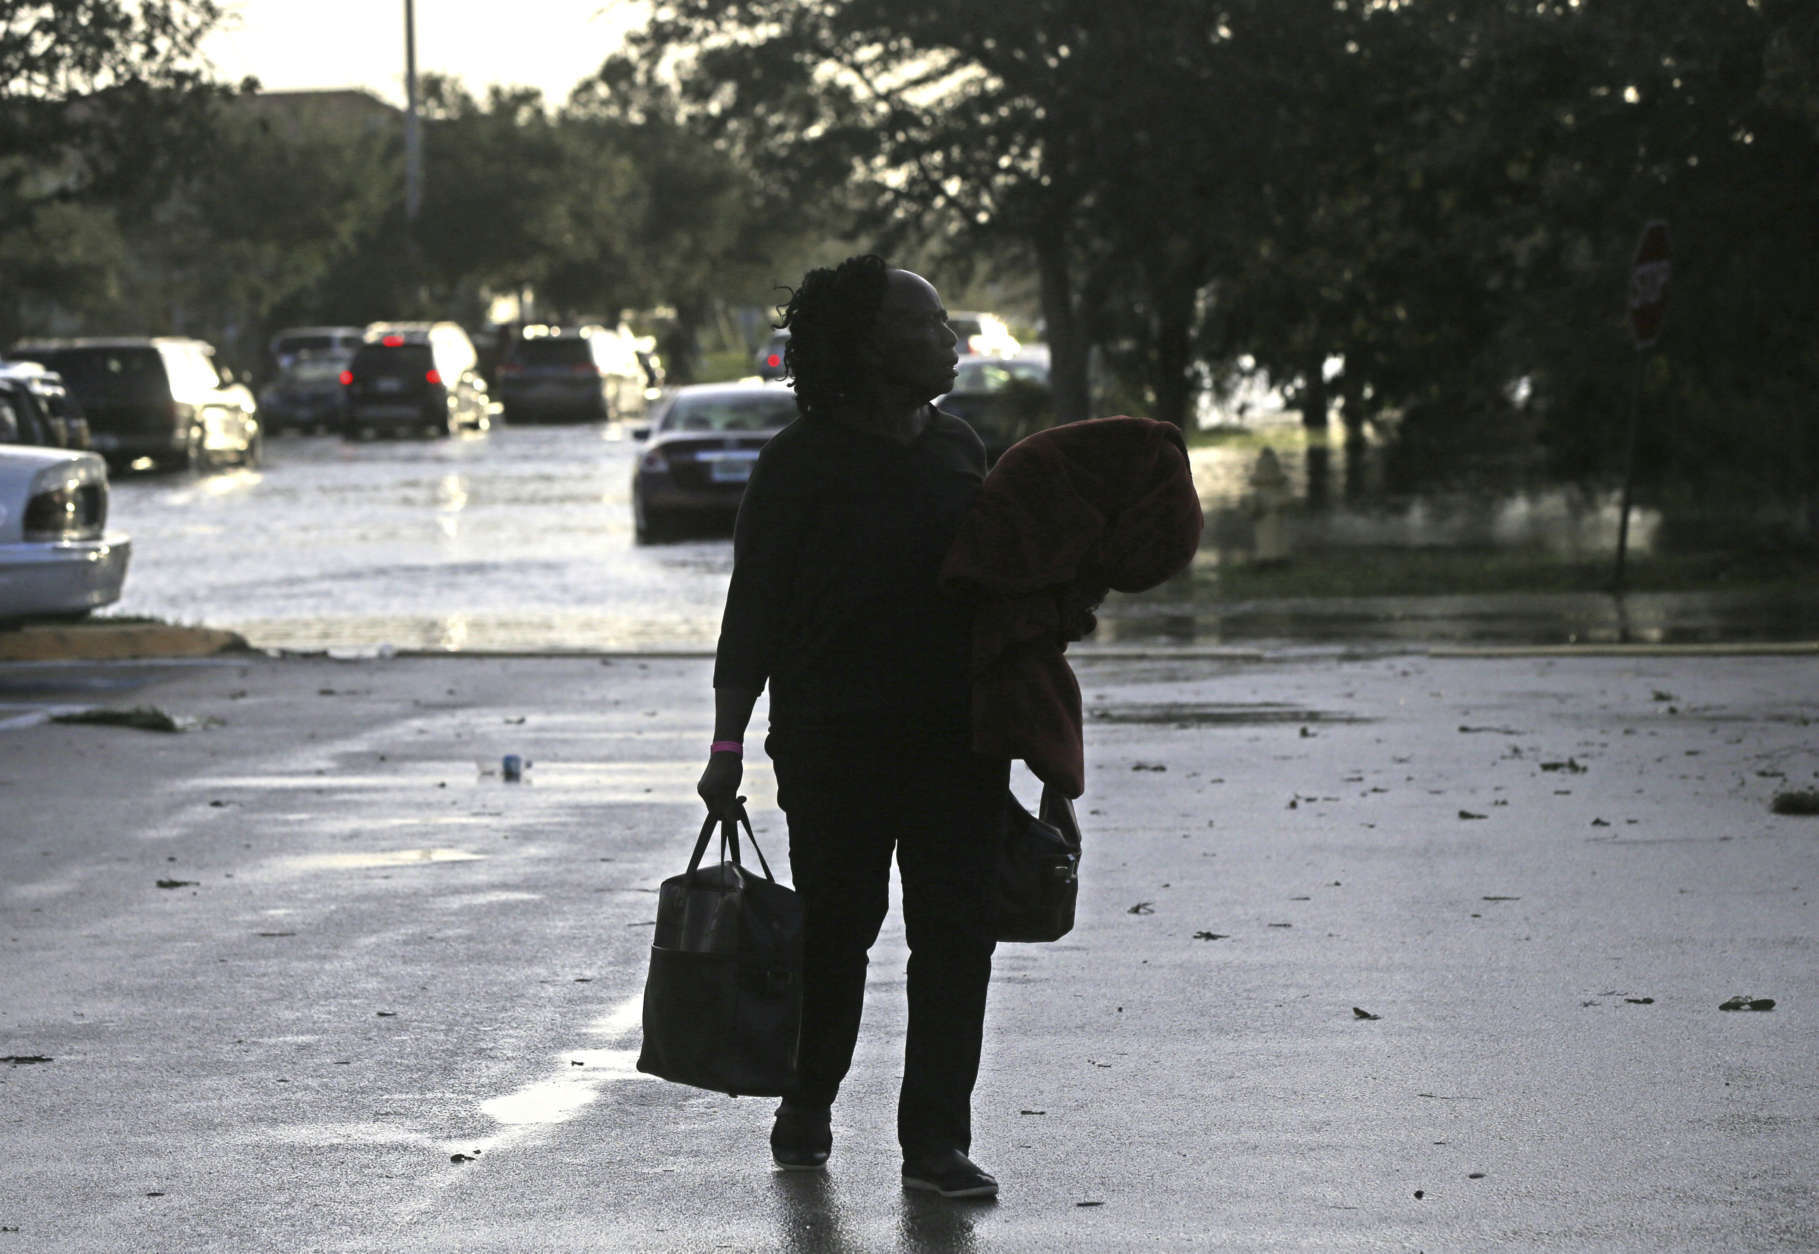 An evacuee leaves the Germain Arena, which was used as an evacuation shelter for Hurricane Irma, which passed through yesterday, in Estero, Fla., Monday, Sept. 11, 2017. (AP Photo/Gerald Herbert)